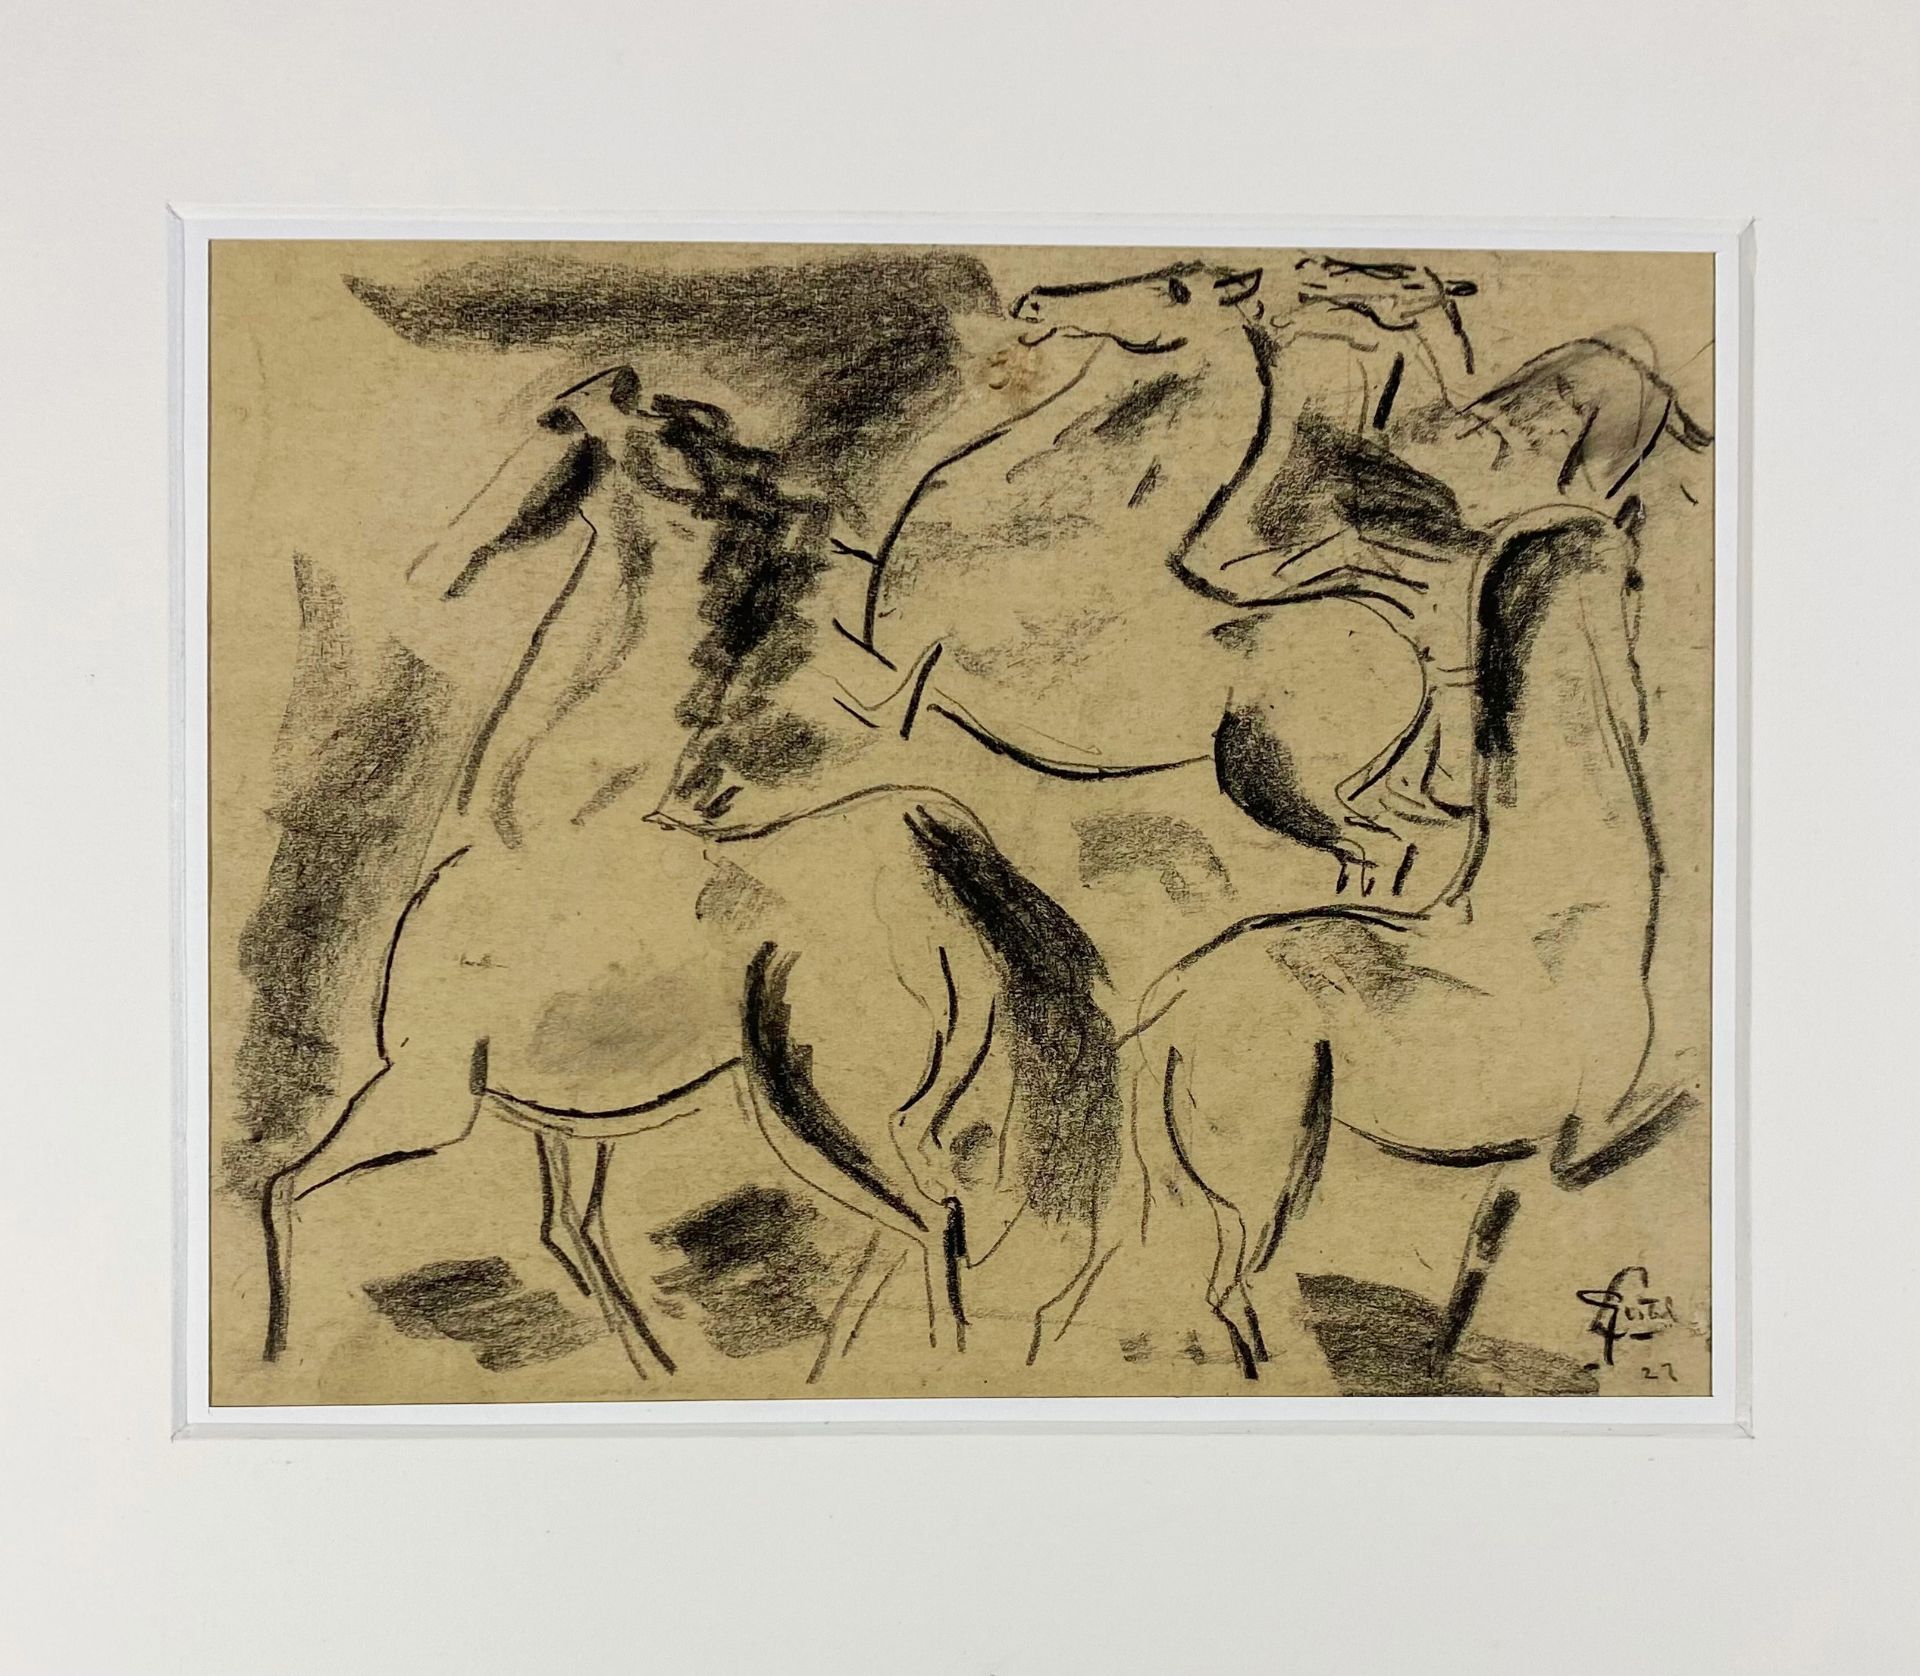 GESTEL, Leo (1881-1941). (Horses). 1927. Drawing in charcoal on paper (laid down